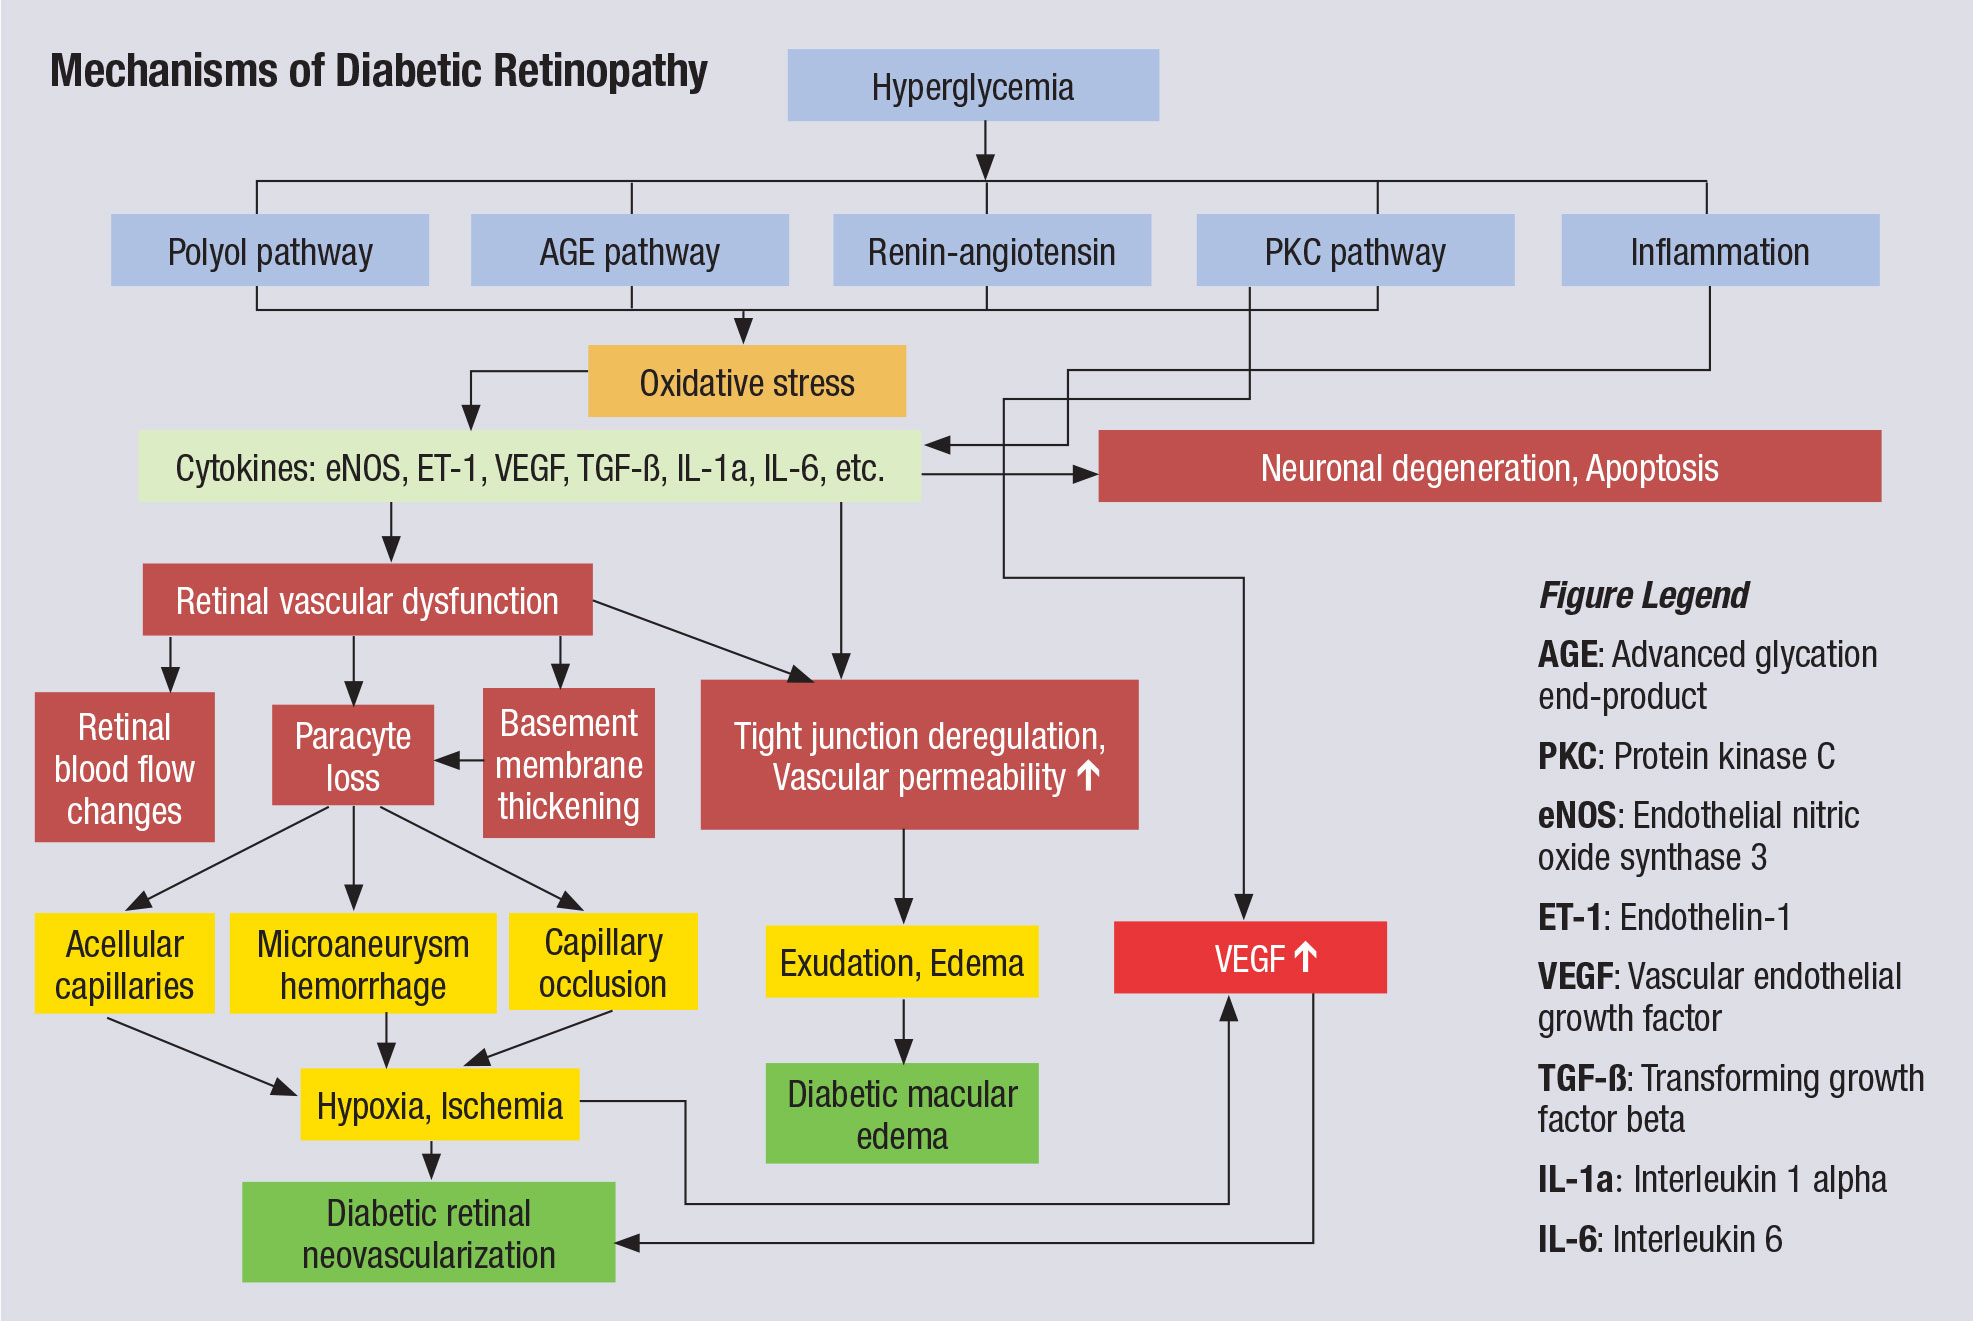 Global epidemiology of prediabetes - present and future perspectives.